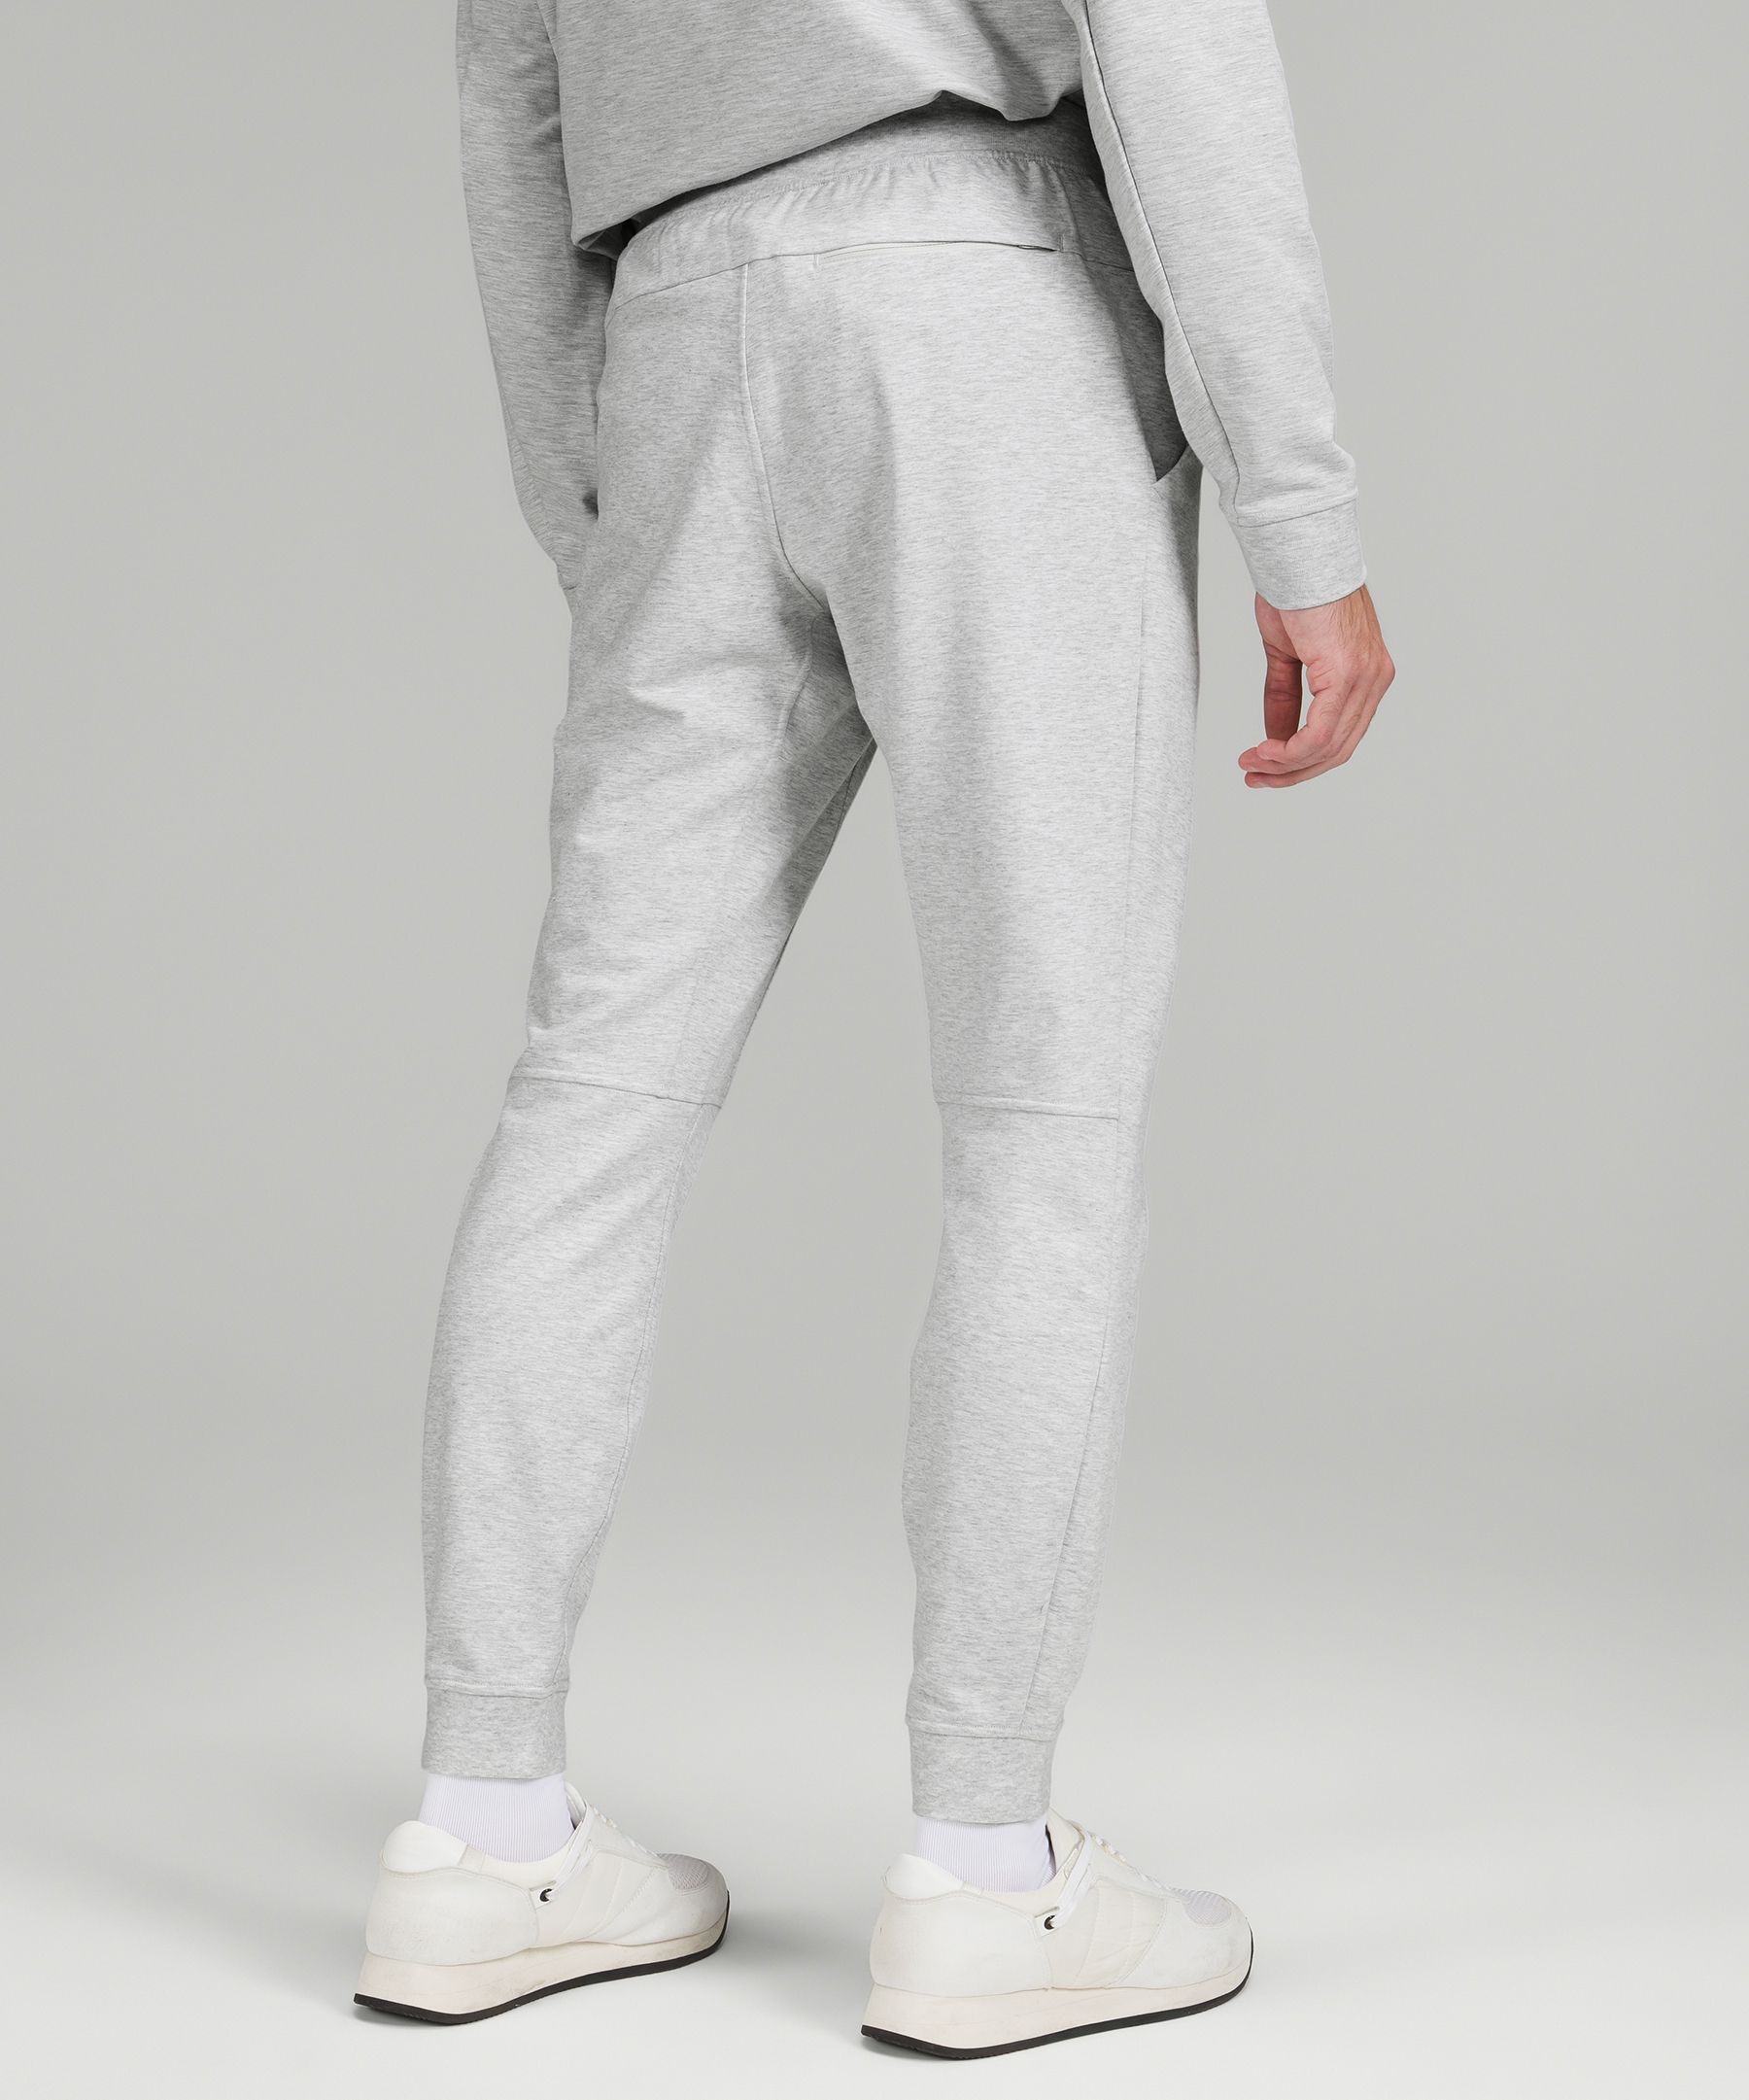 LULULEMON City Sweat Slim-Fit Tapered French Terry Sweatpants for